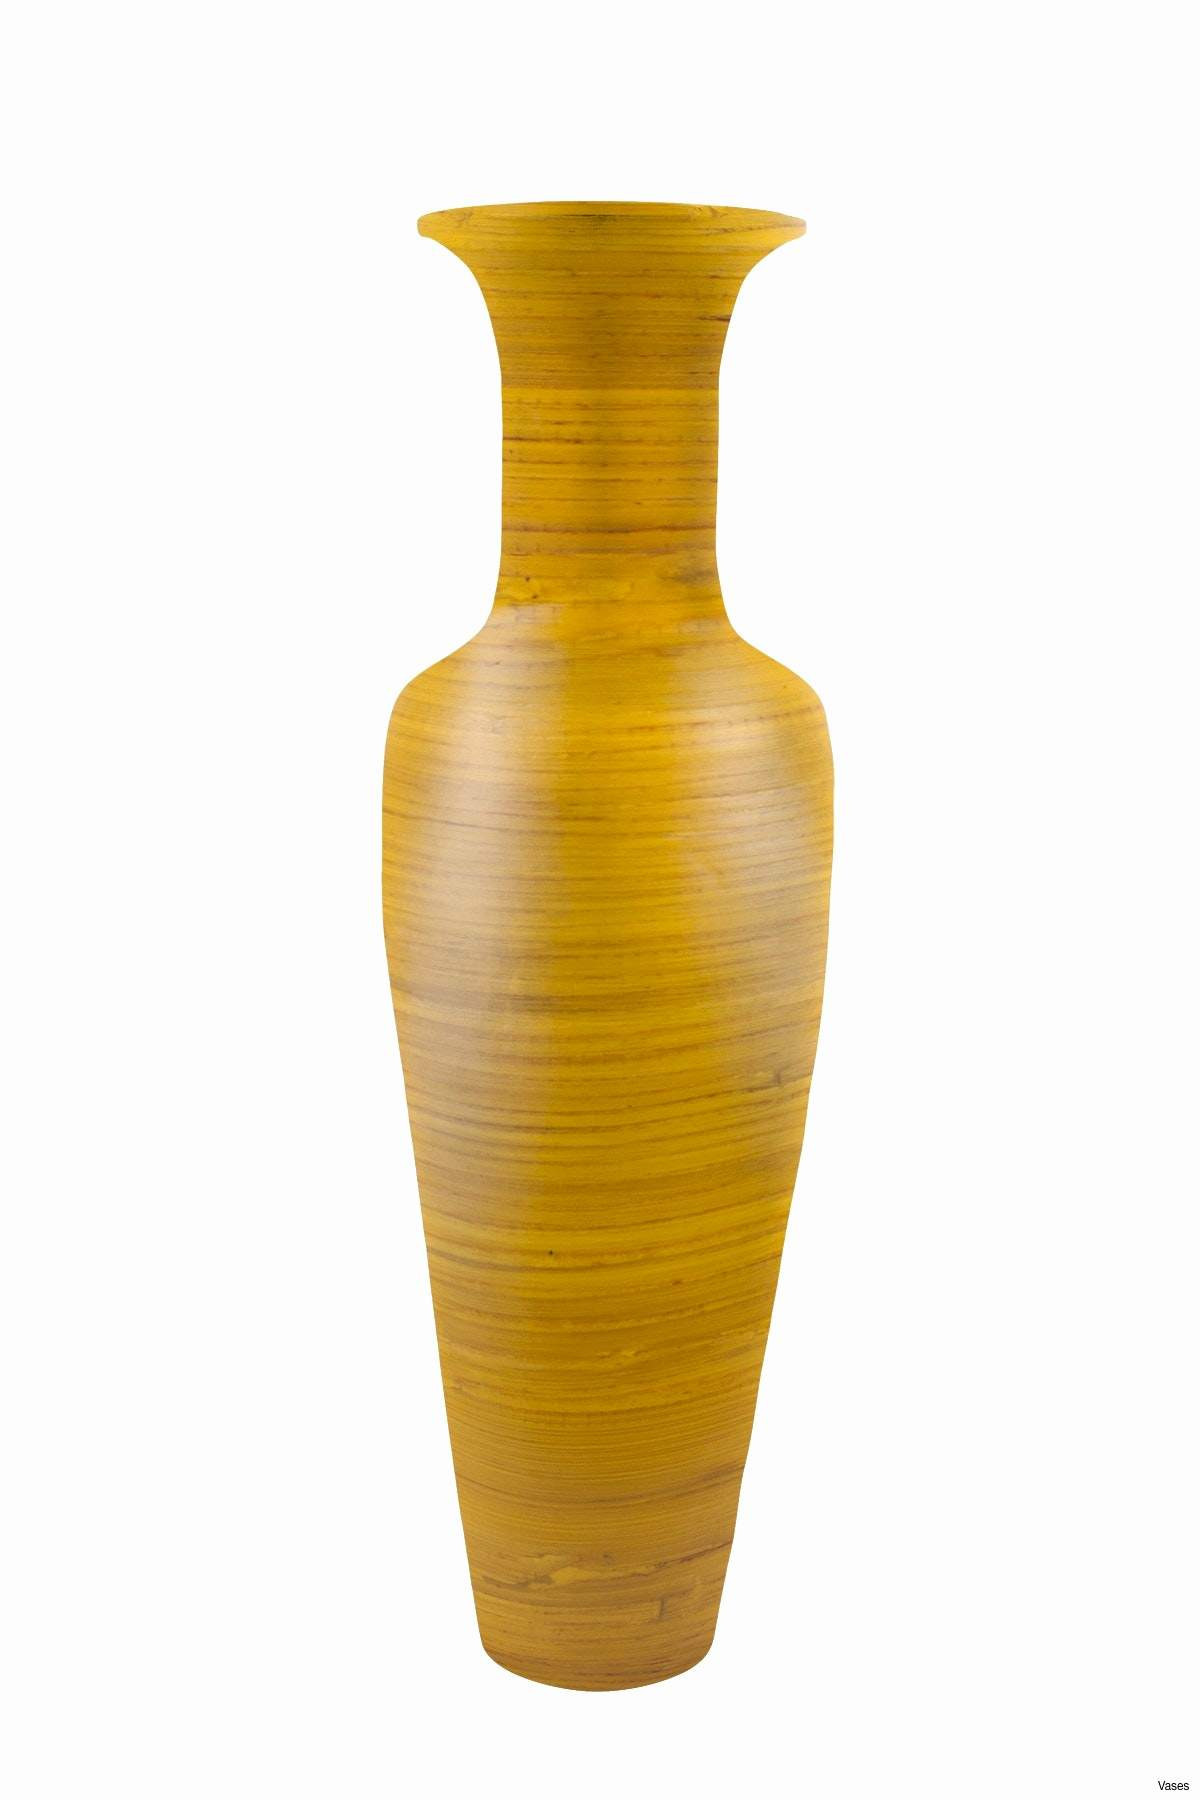 25 Cute Mccoy Vases for Sale 2024 free download mccoy vases for sale of yellow and grey vase photos download advanced coloring pages with regard to yellow and grey vase photograph area floor rugs new joaquin gray vases set 3 2h pottery